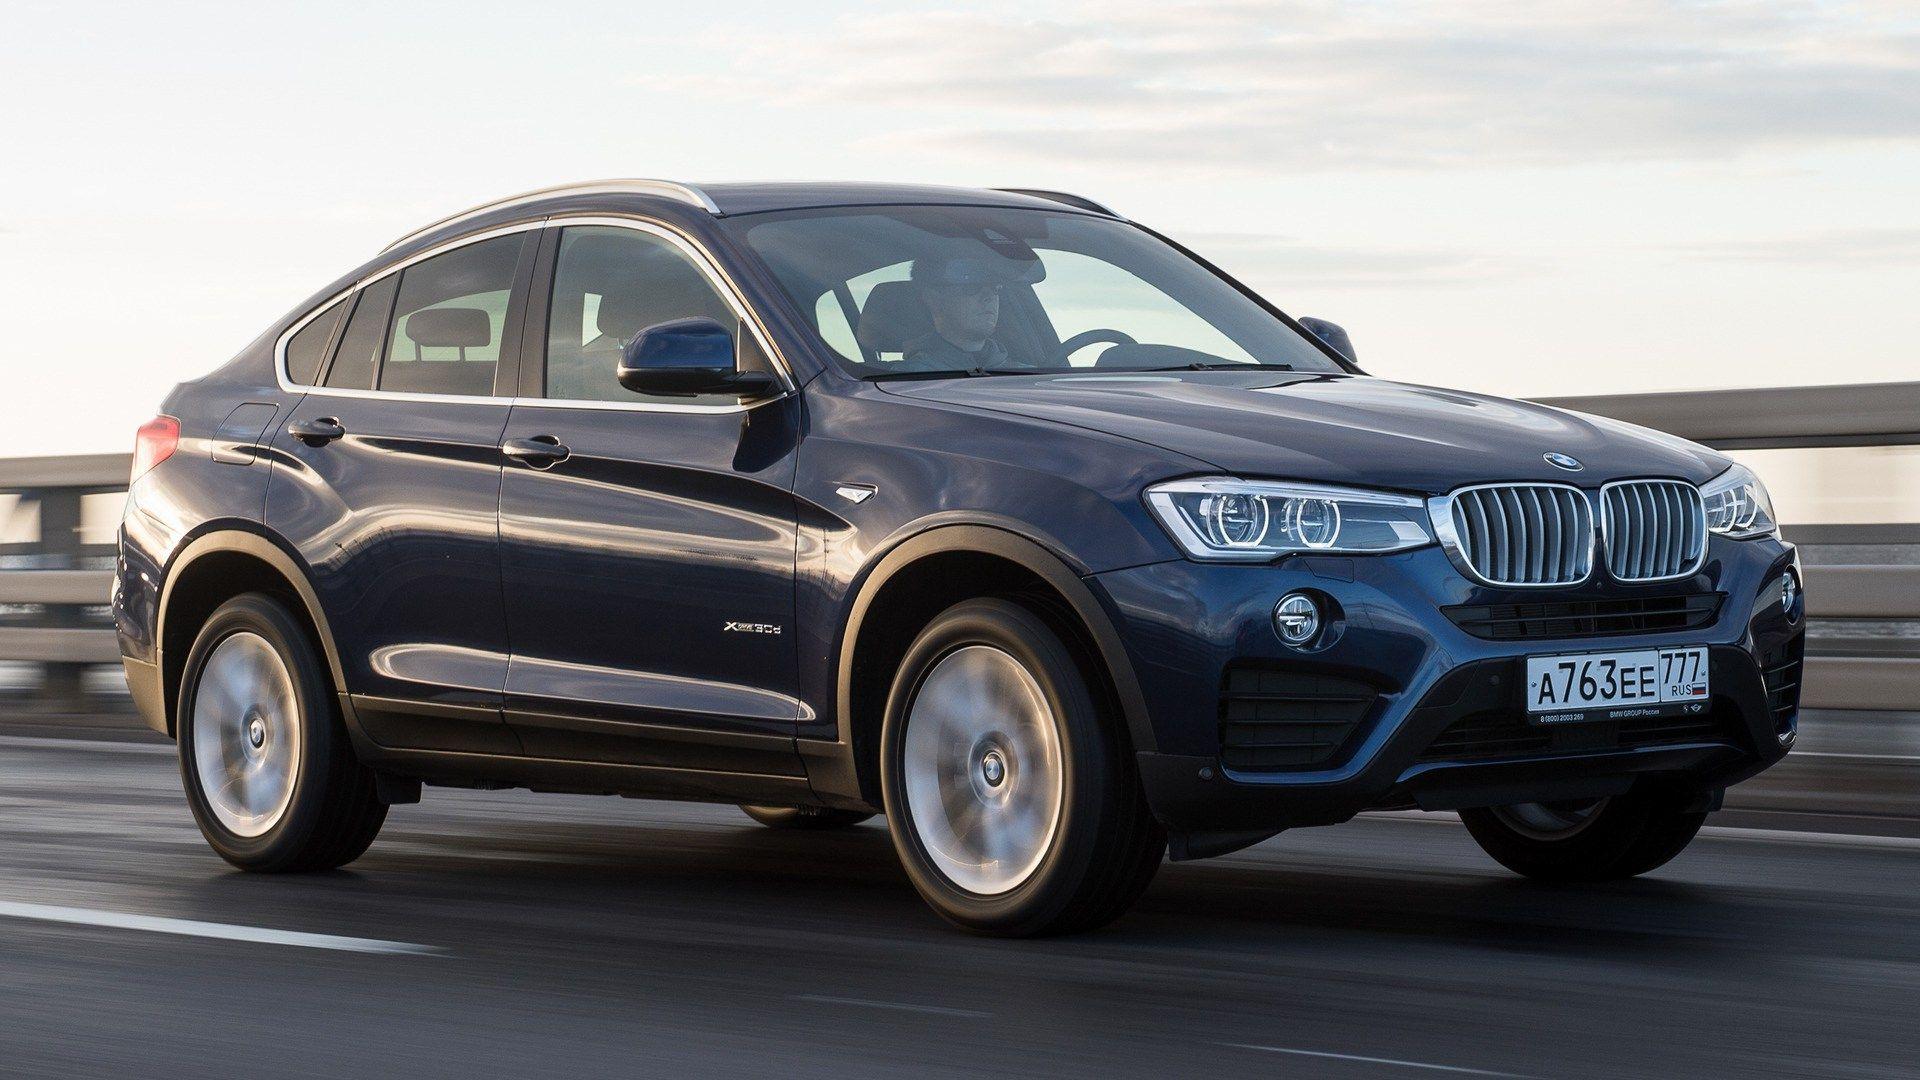 Beaufiful Bmw X4 30d. BMW X4 30d 2014 Wallpaper and HD Image Car